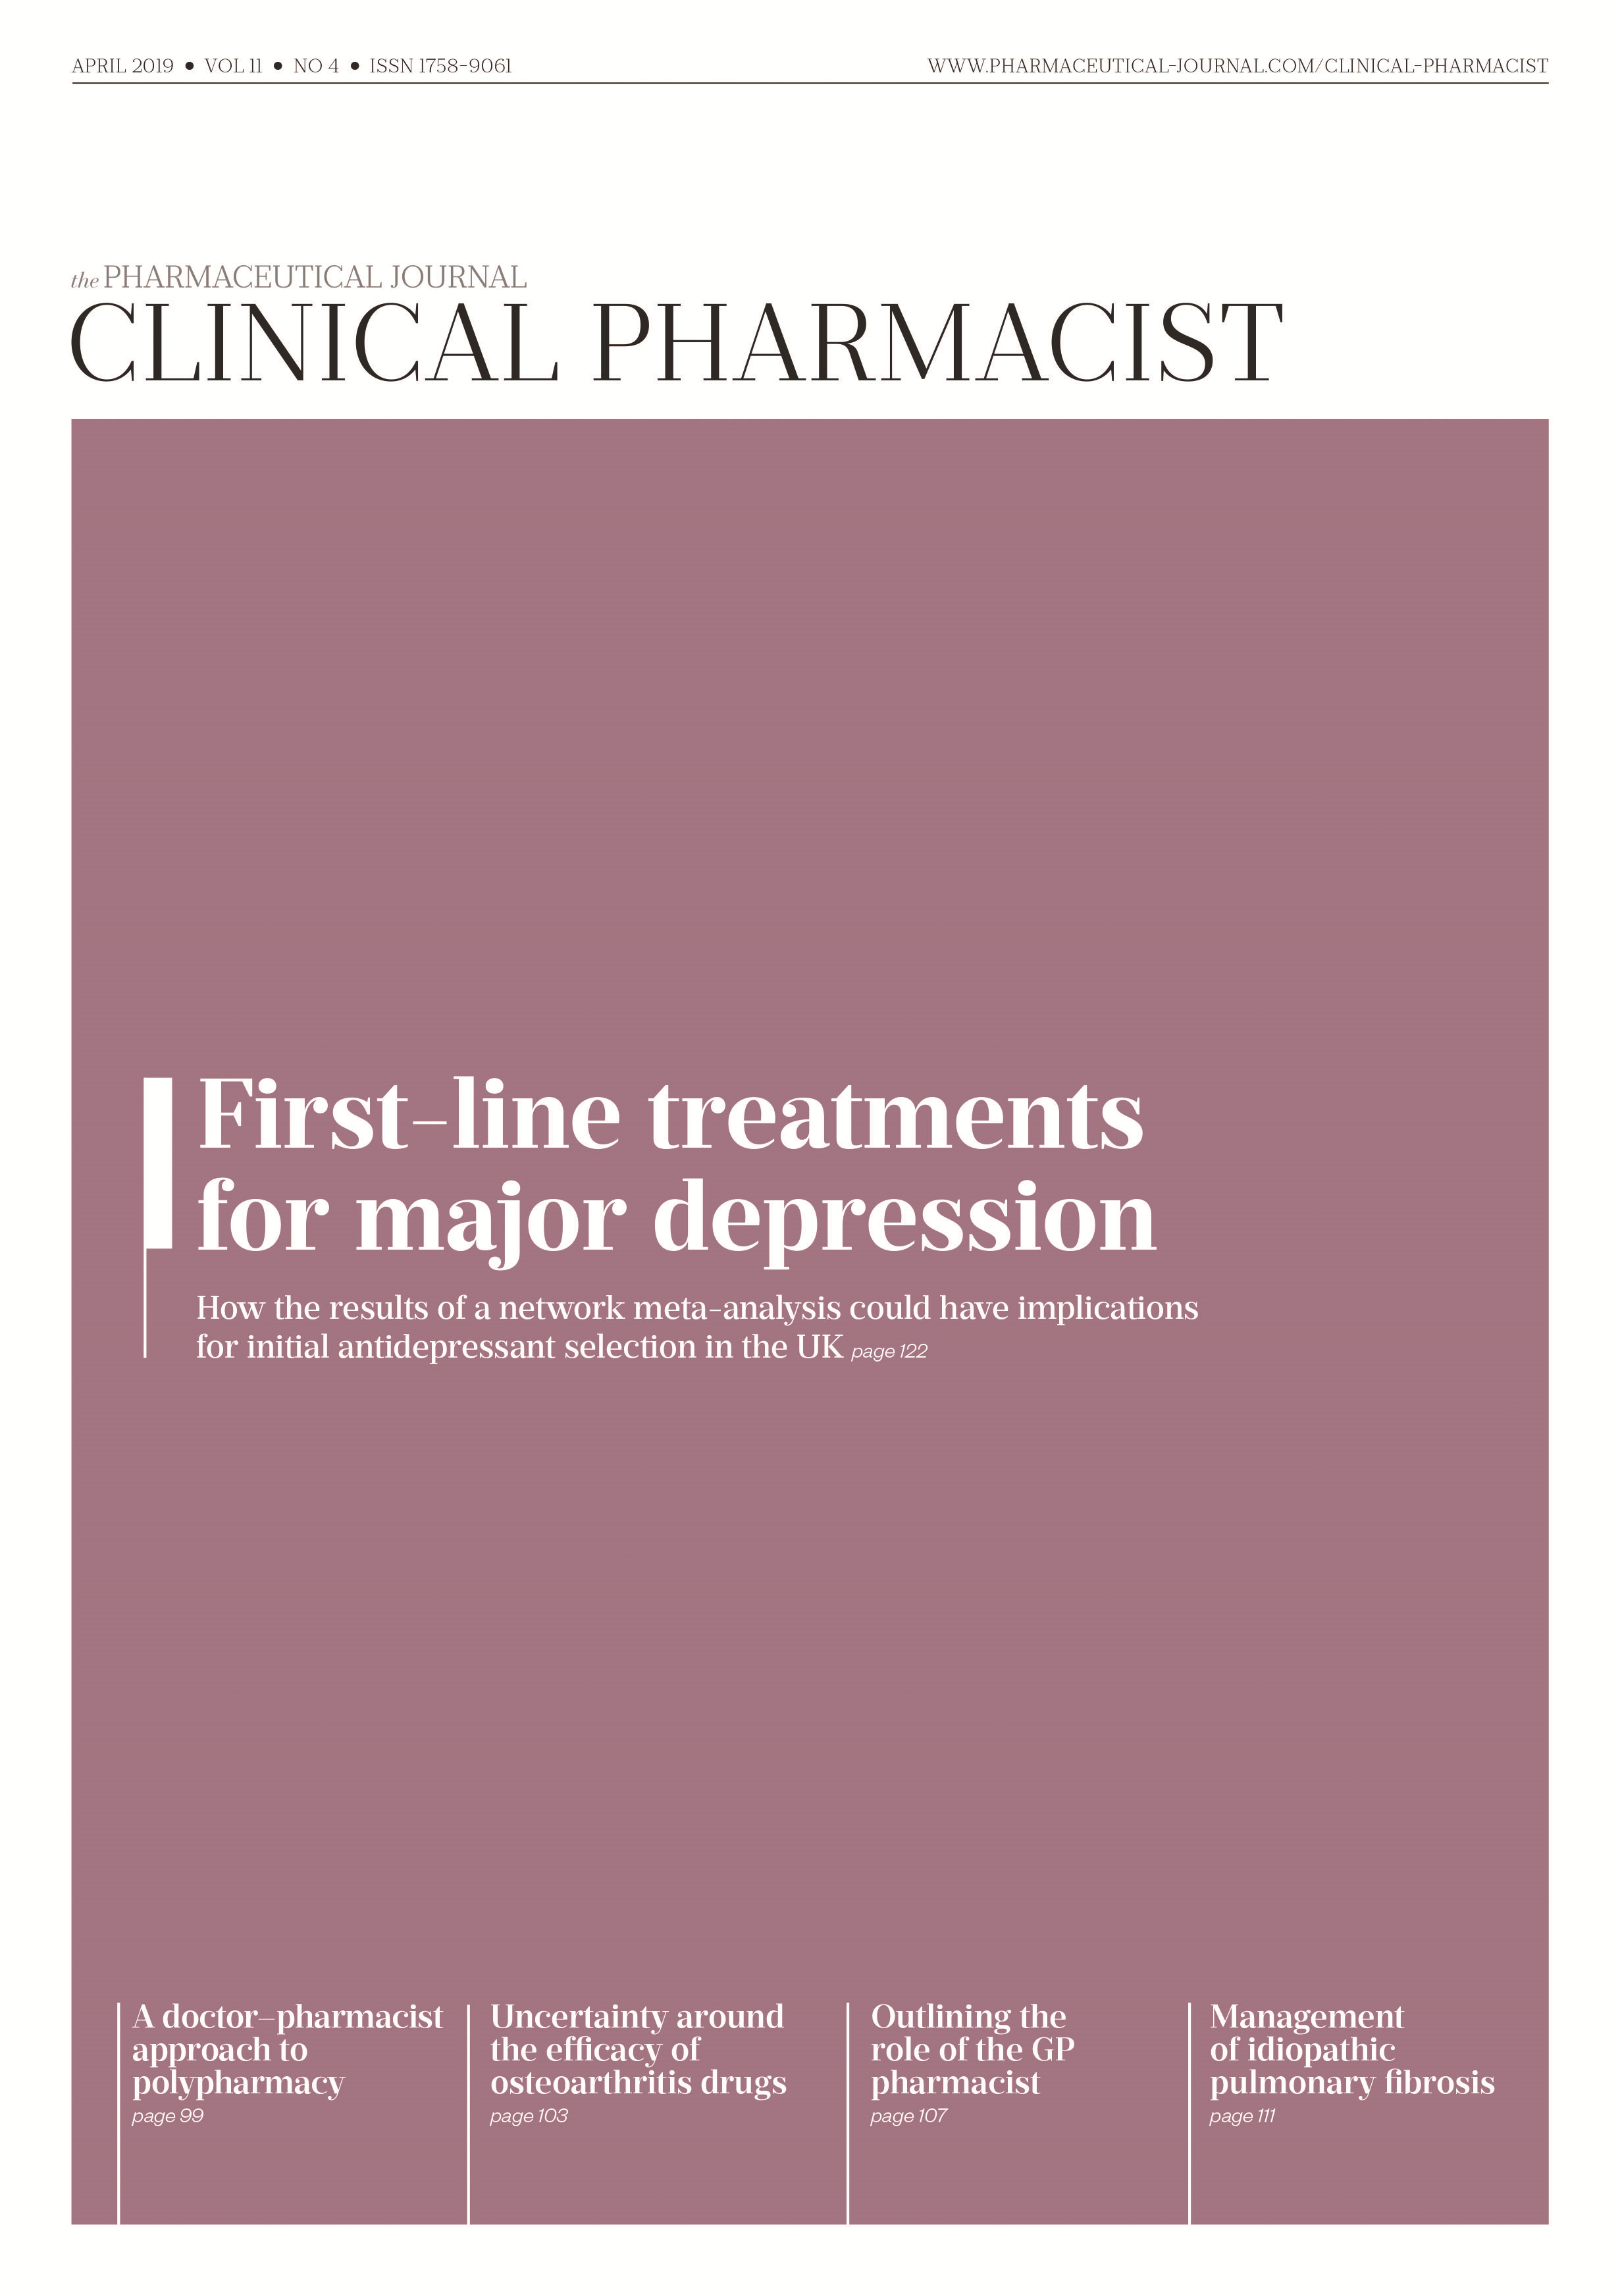 Publication issue cover for CP, April 2019, Vol 11, No 4